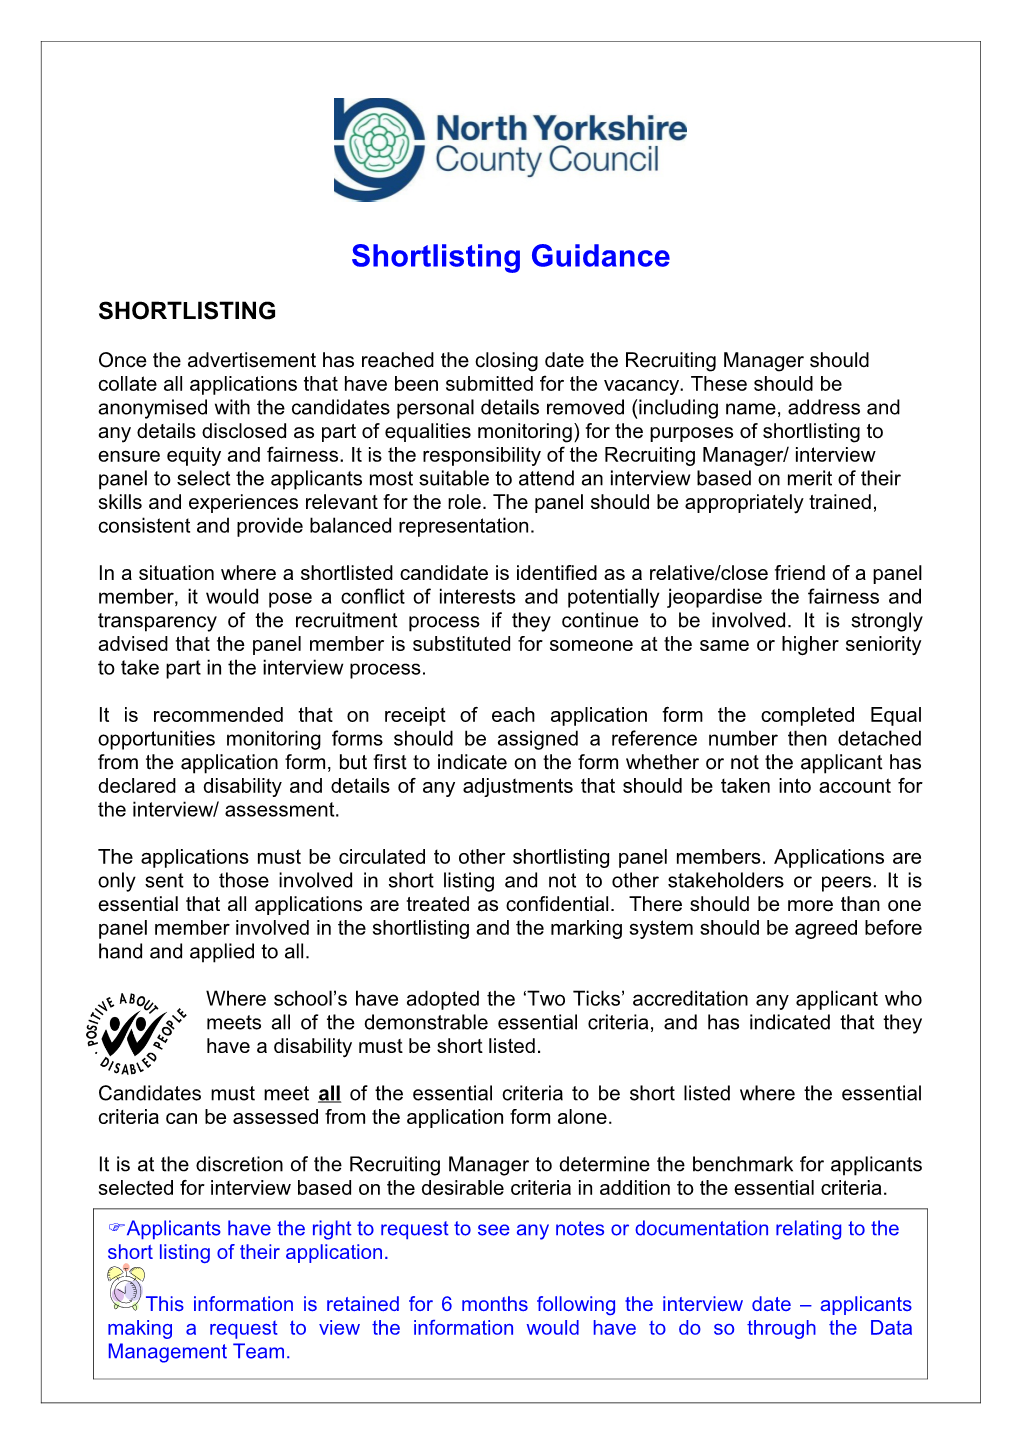 5 Additional Policy Guidance - Shortlisting